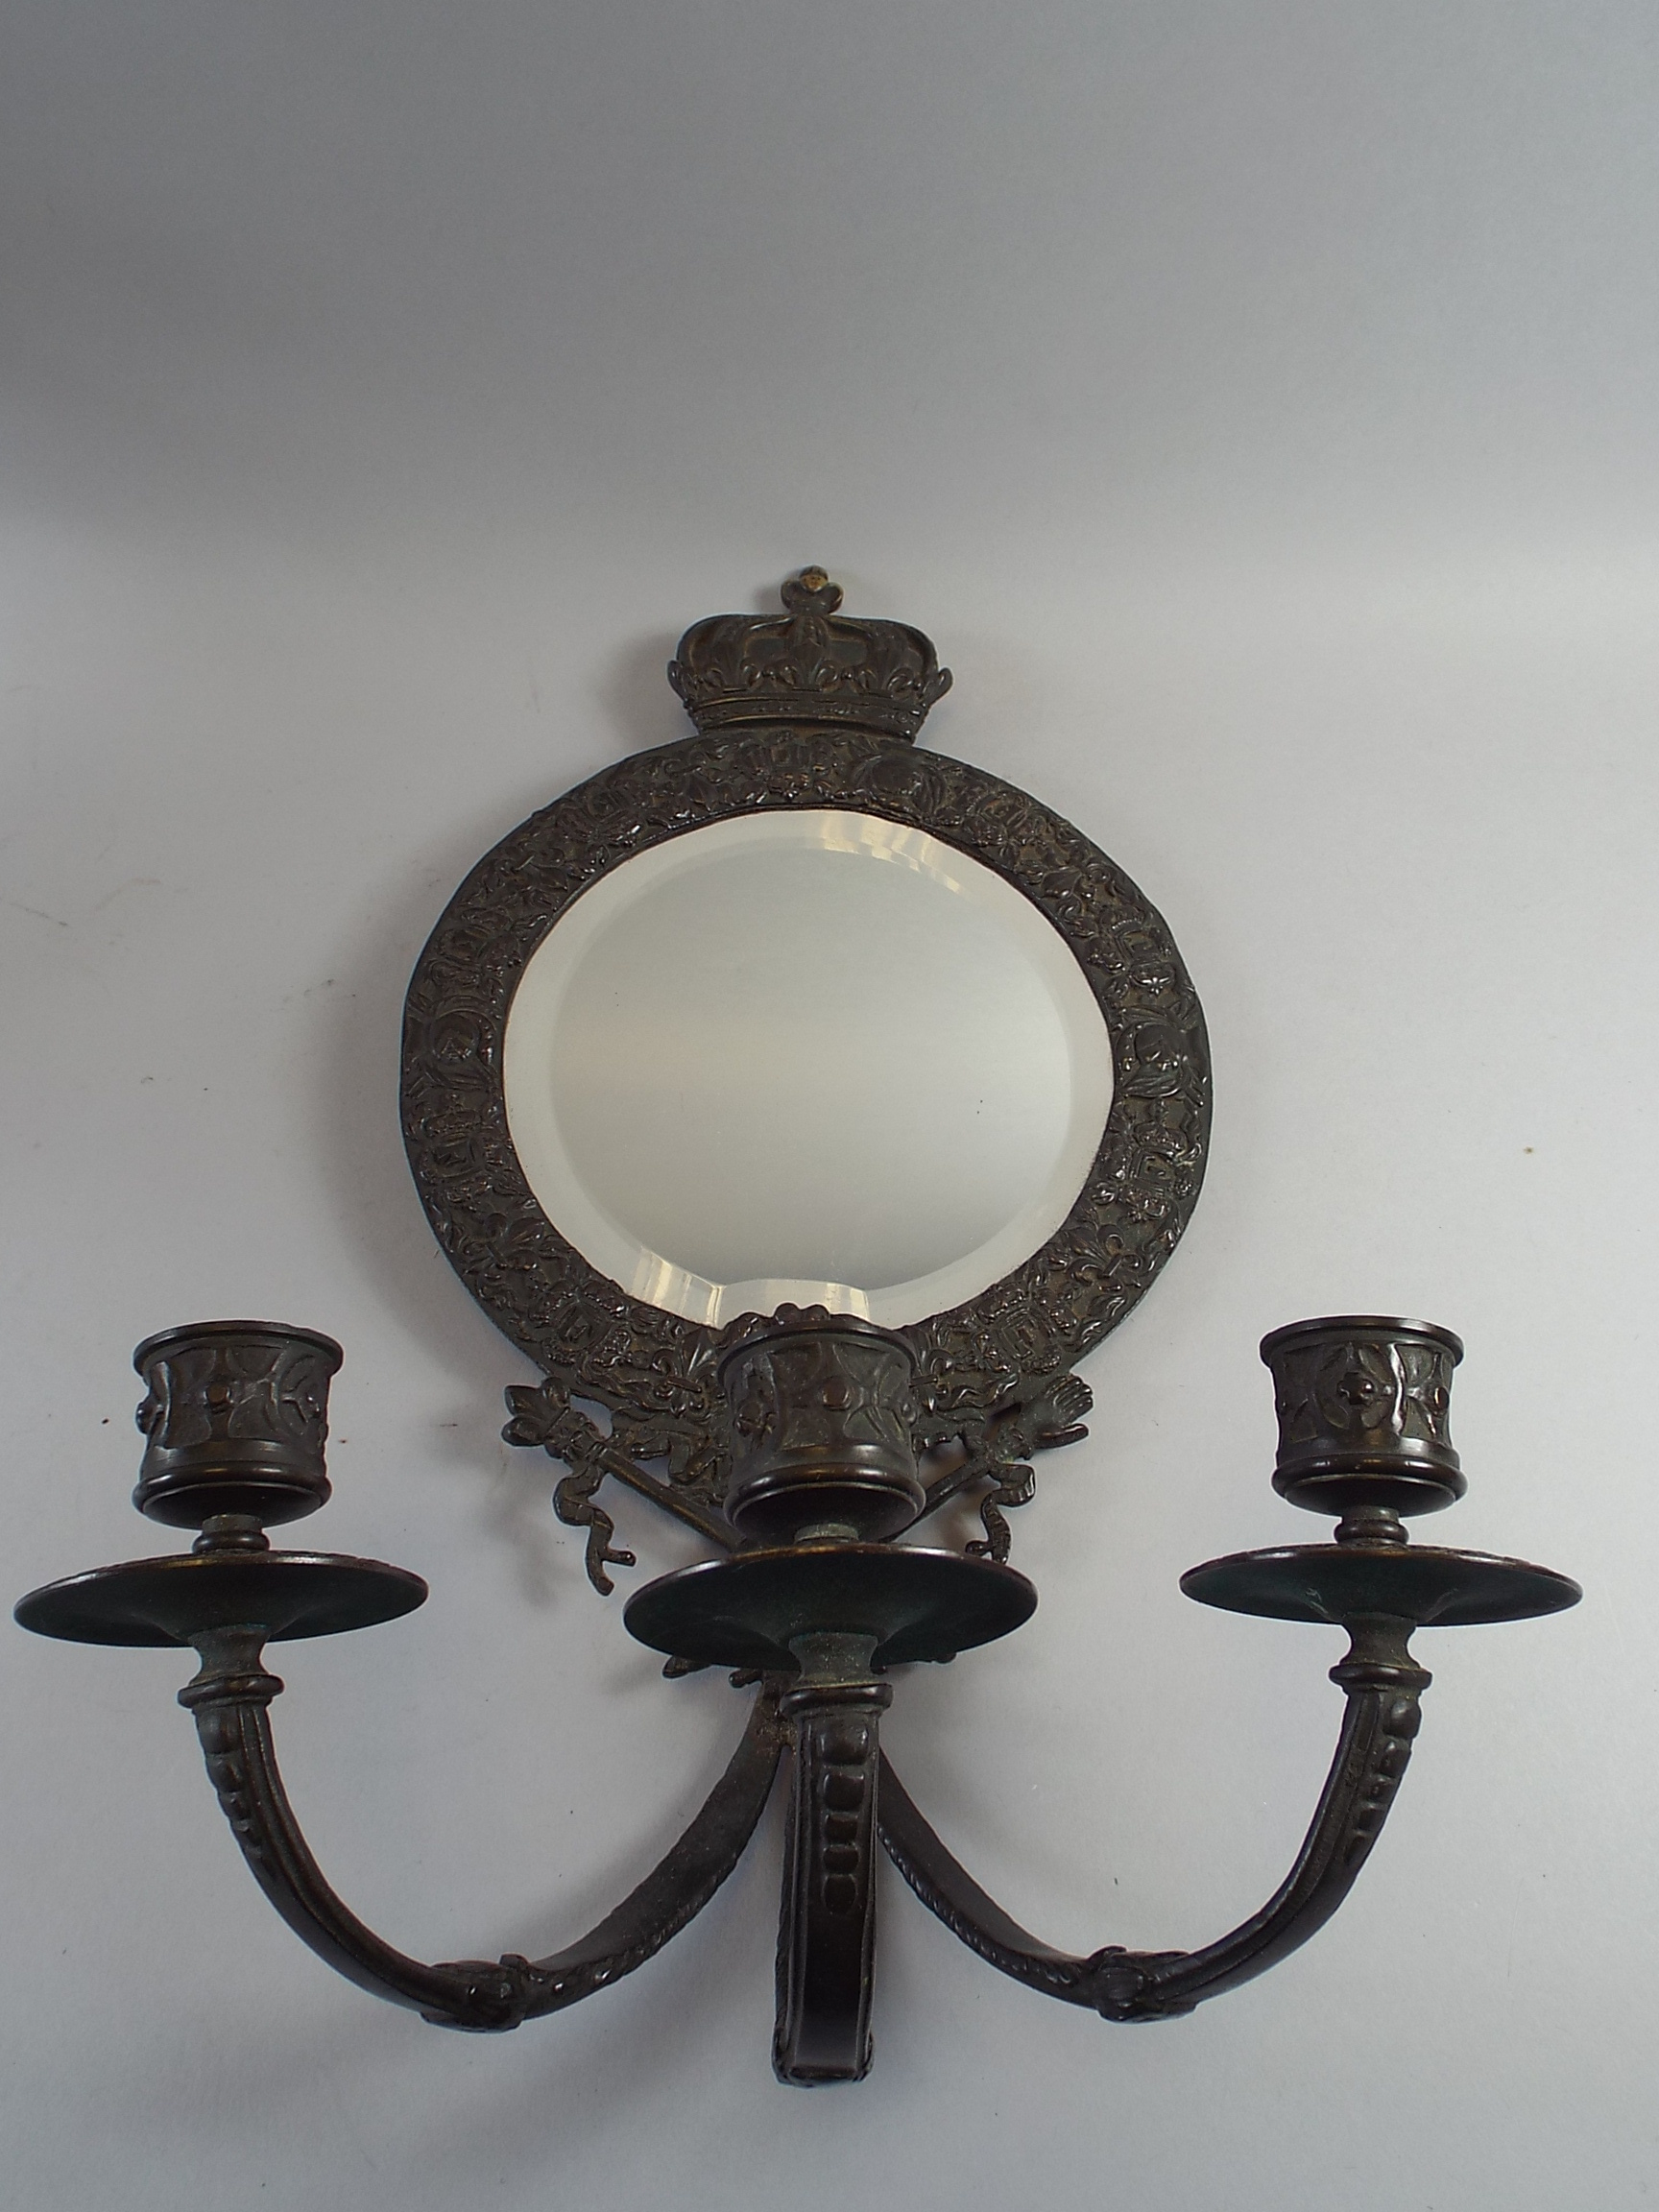 A 19th Century Bronze Girandole Wall Mirror with Three Shaped Arms and Candle Sconces. 38x24cm